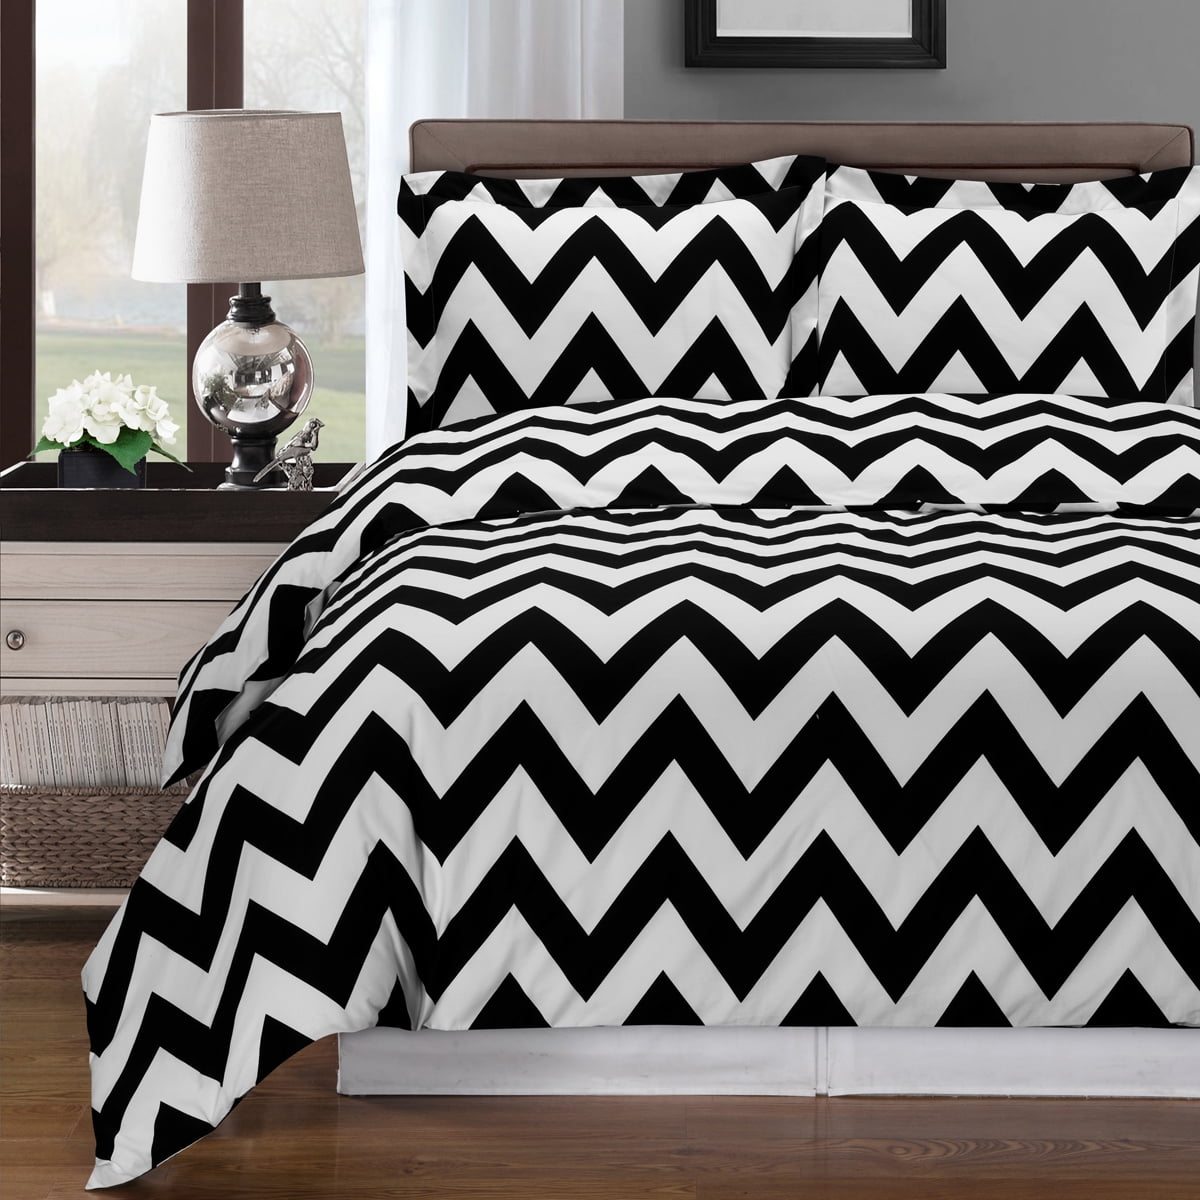 Clearance Soft 100 Cotton Printed 3 Piece Duvet Cover Set King